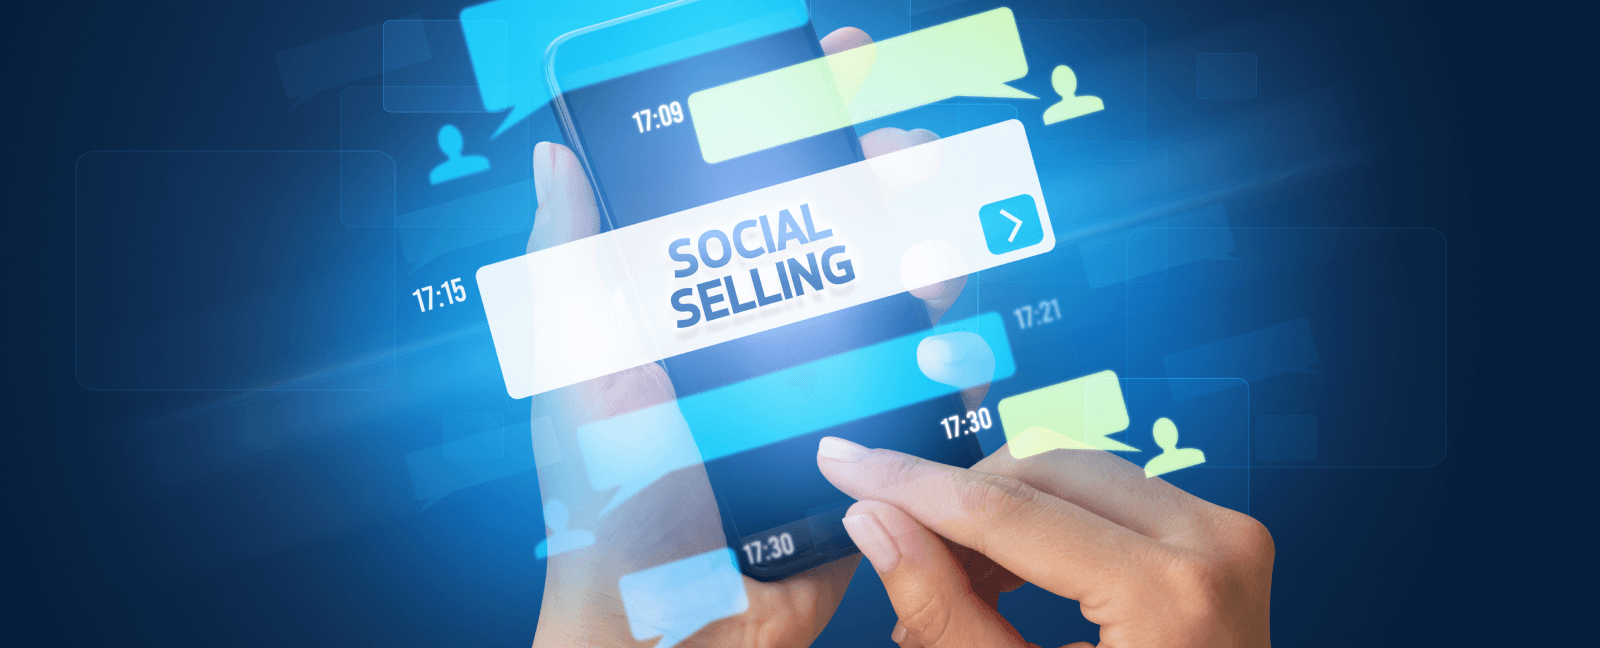 What is Social Selling and How to Do it Effectively?